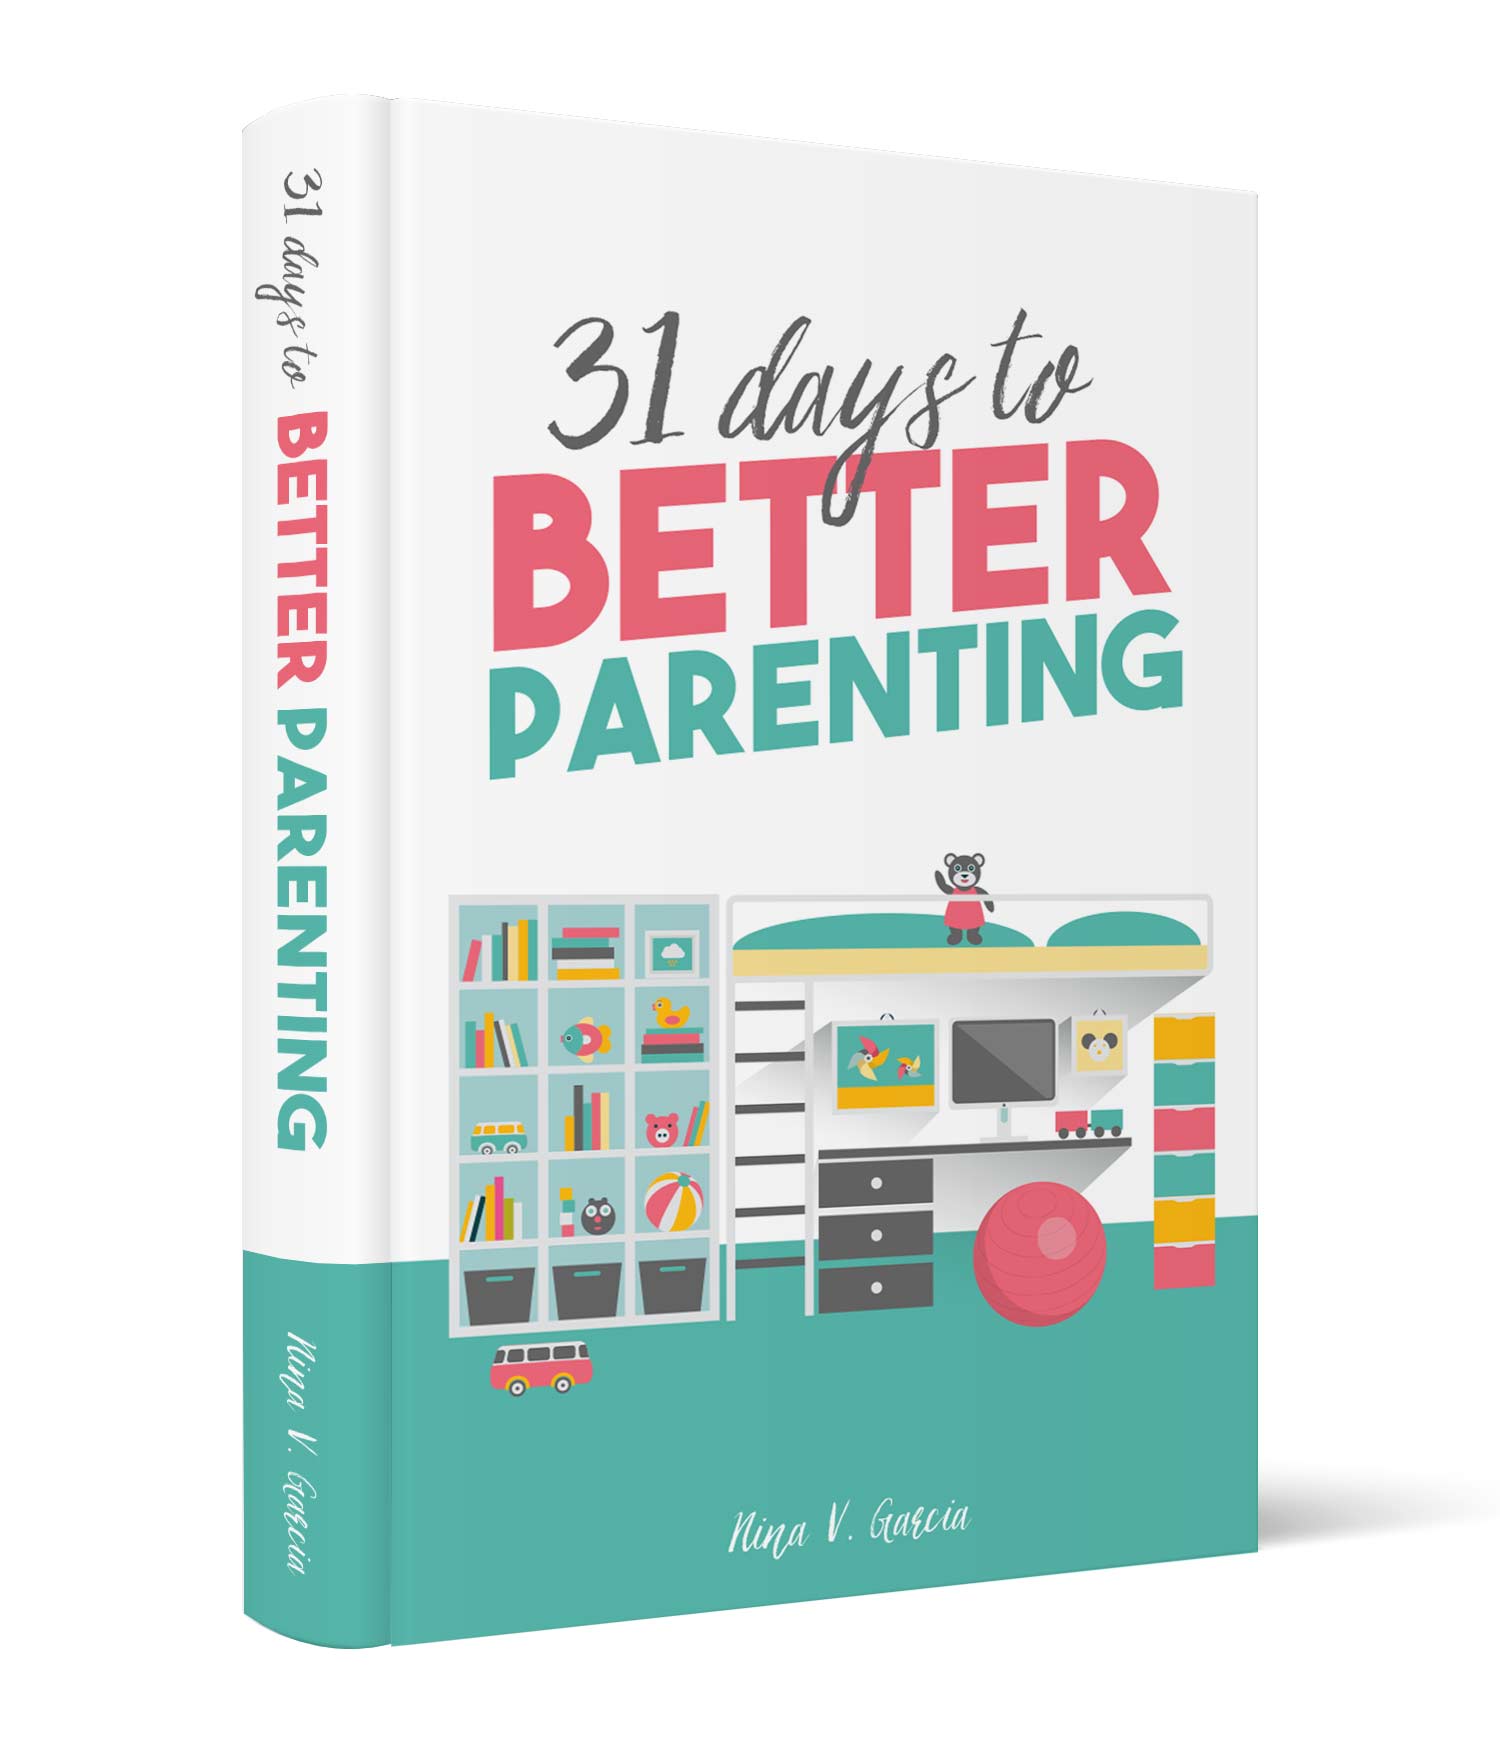 31 Days to Better Parenting